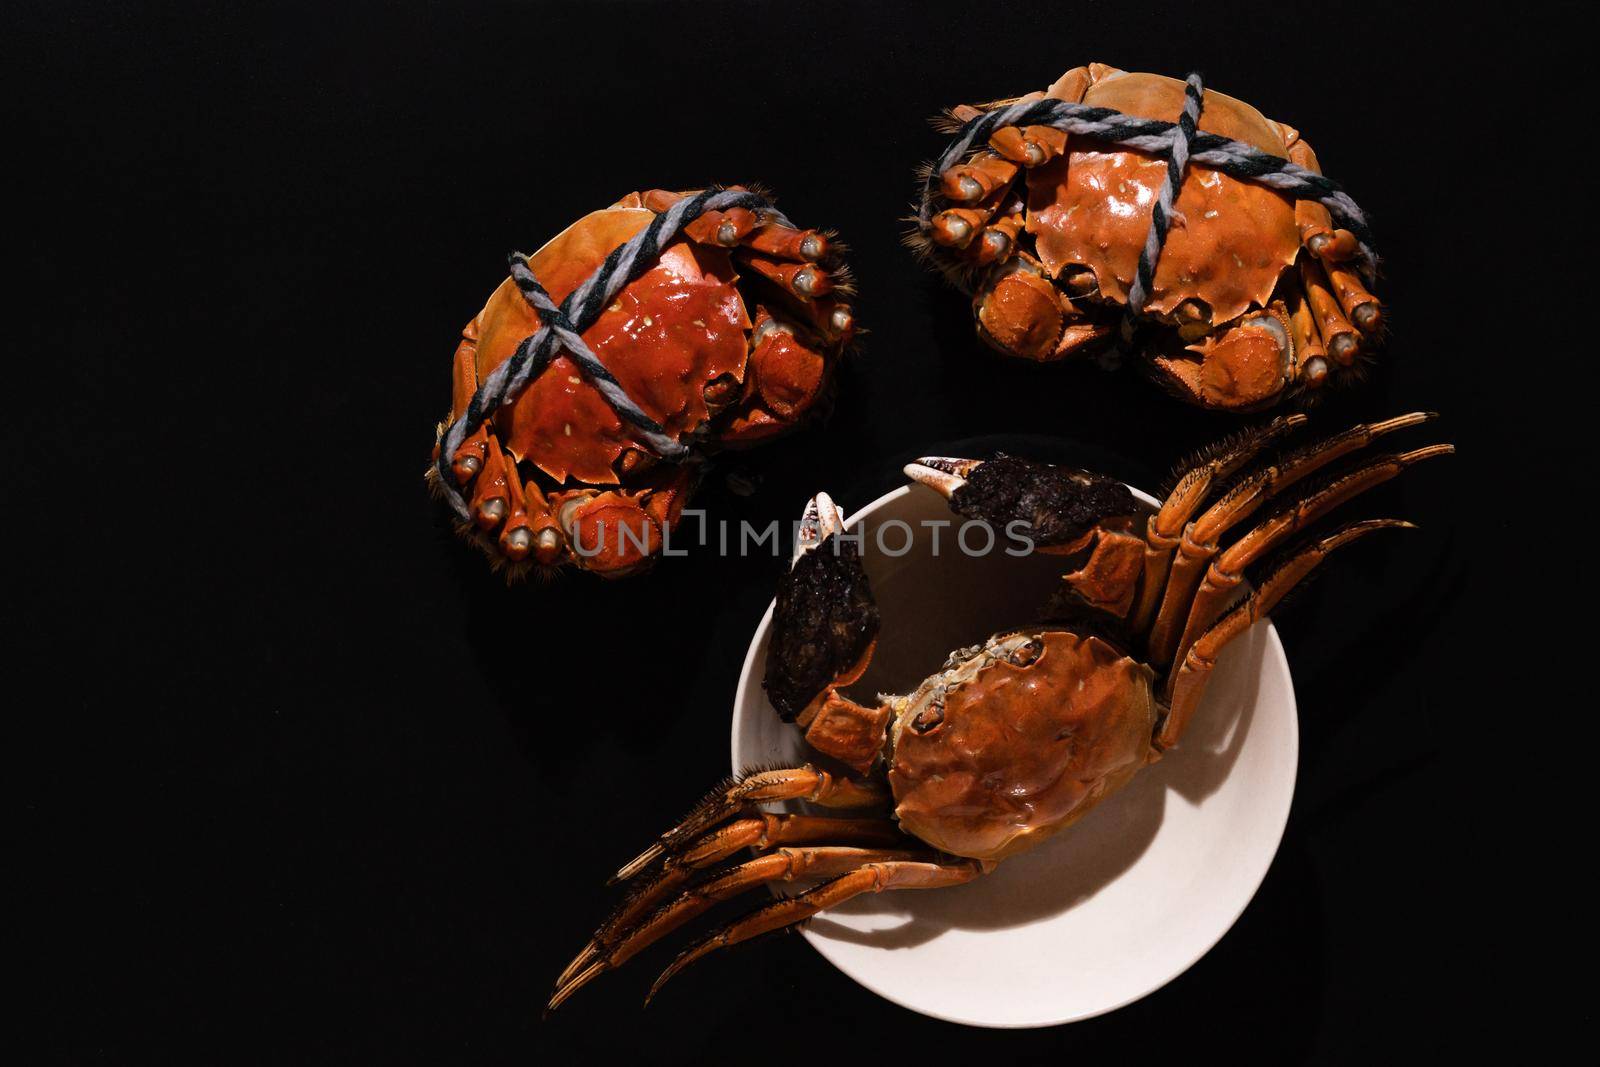 boiled Shanghai hairy crab or Chinese mitten crab (Eriocheir sinensis) with Chili and herb on black background